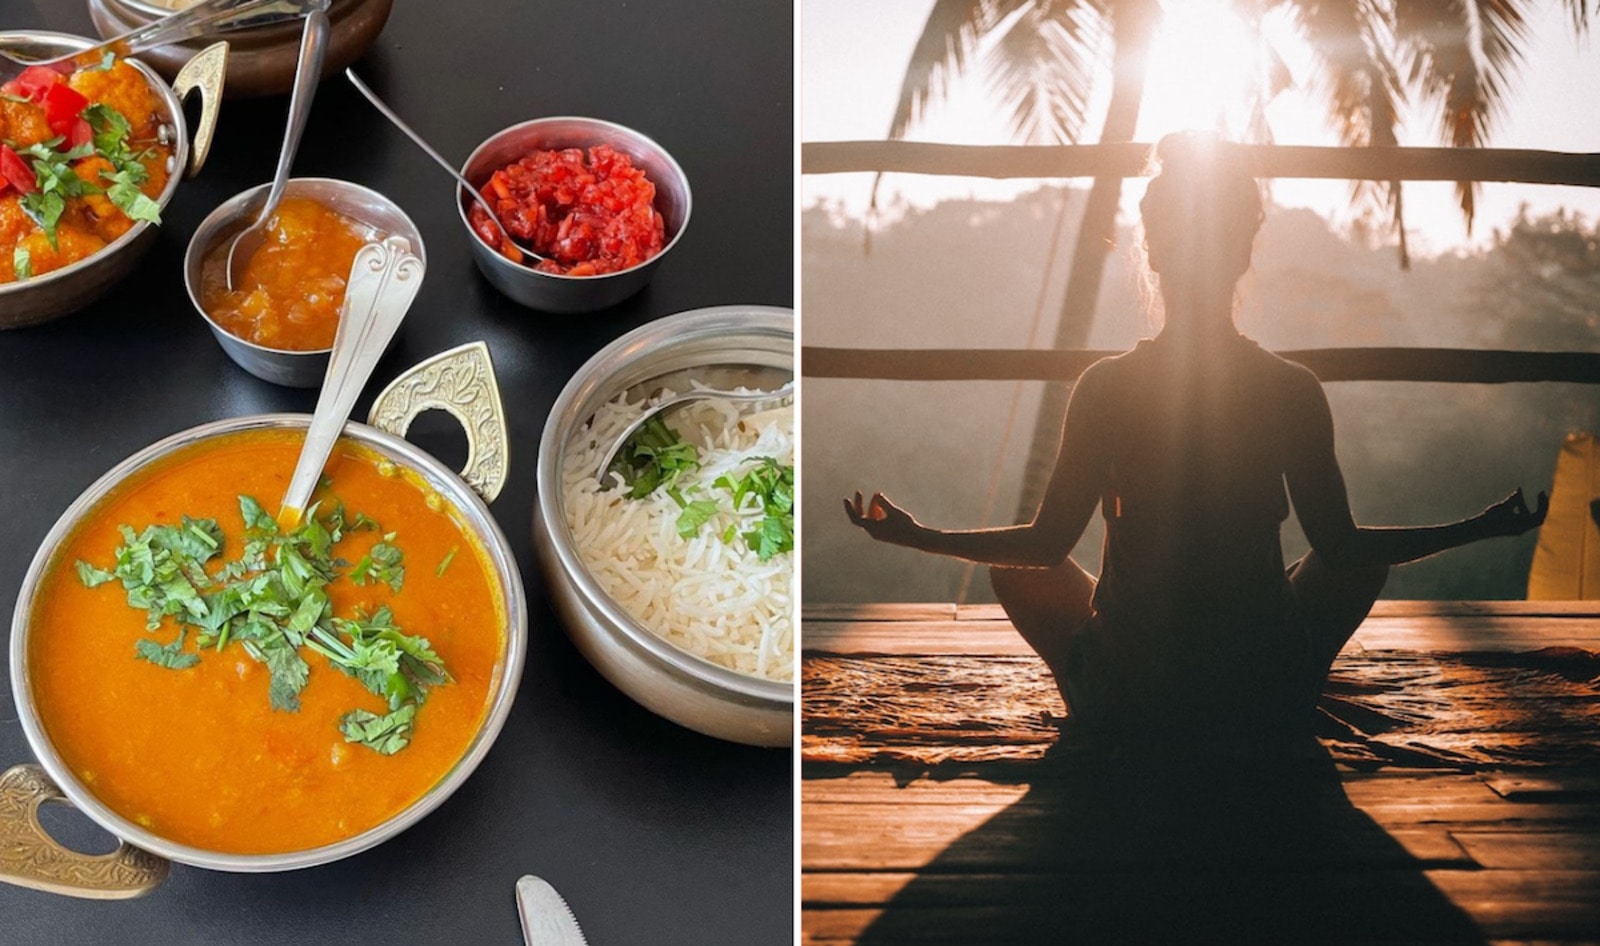 7 Things I Learned About Life from a Vegan Ayurvedic Retreat